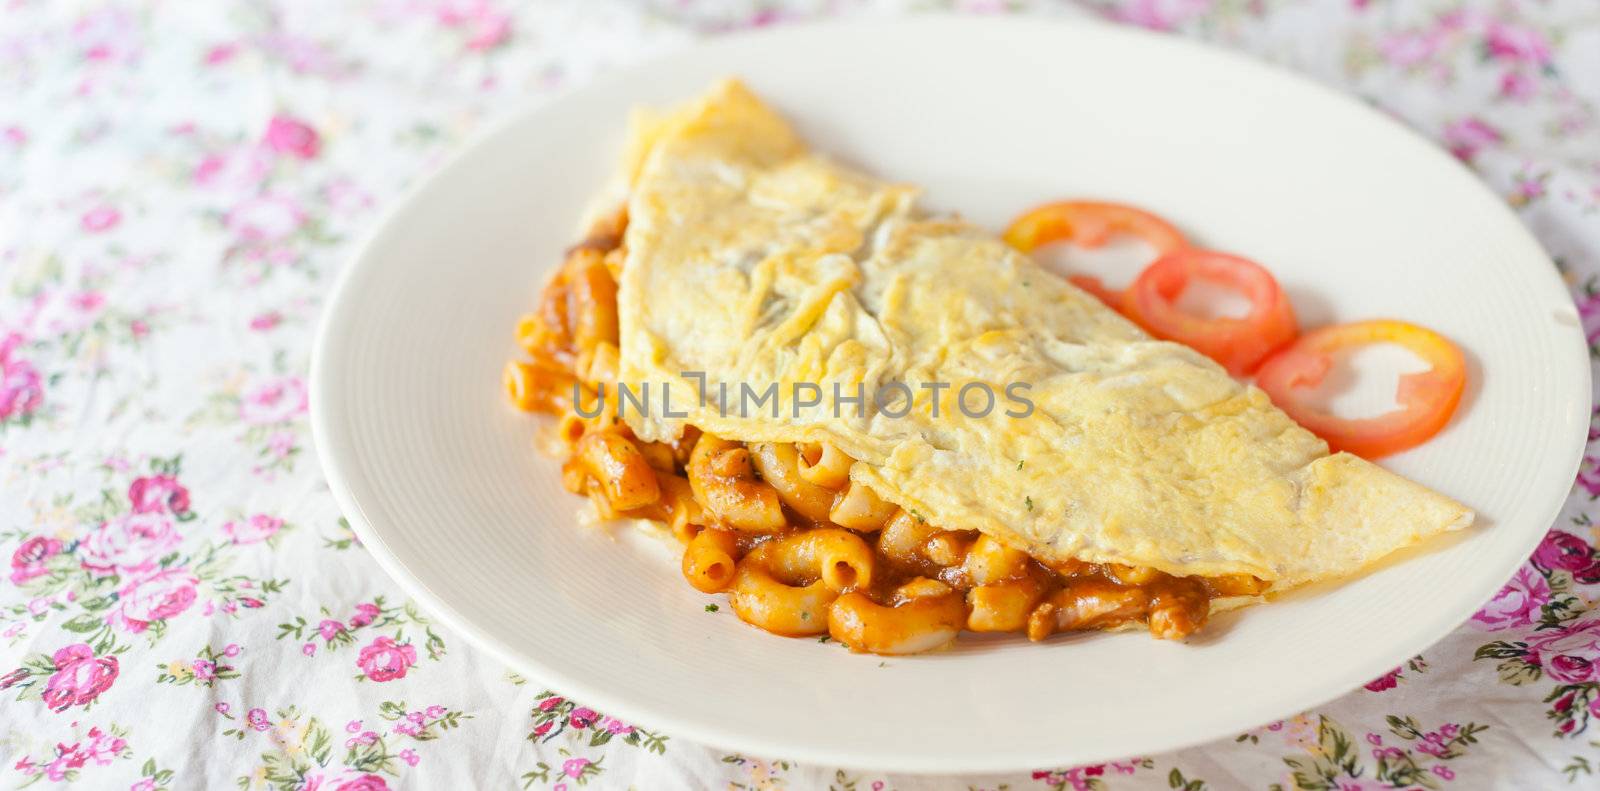 Fried macaroni with tomato sauce wrapped with omelette thai food